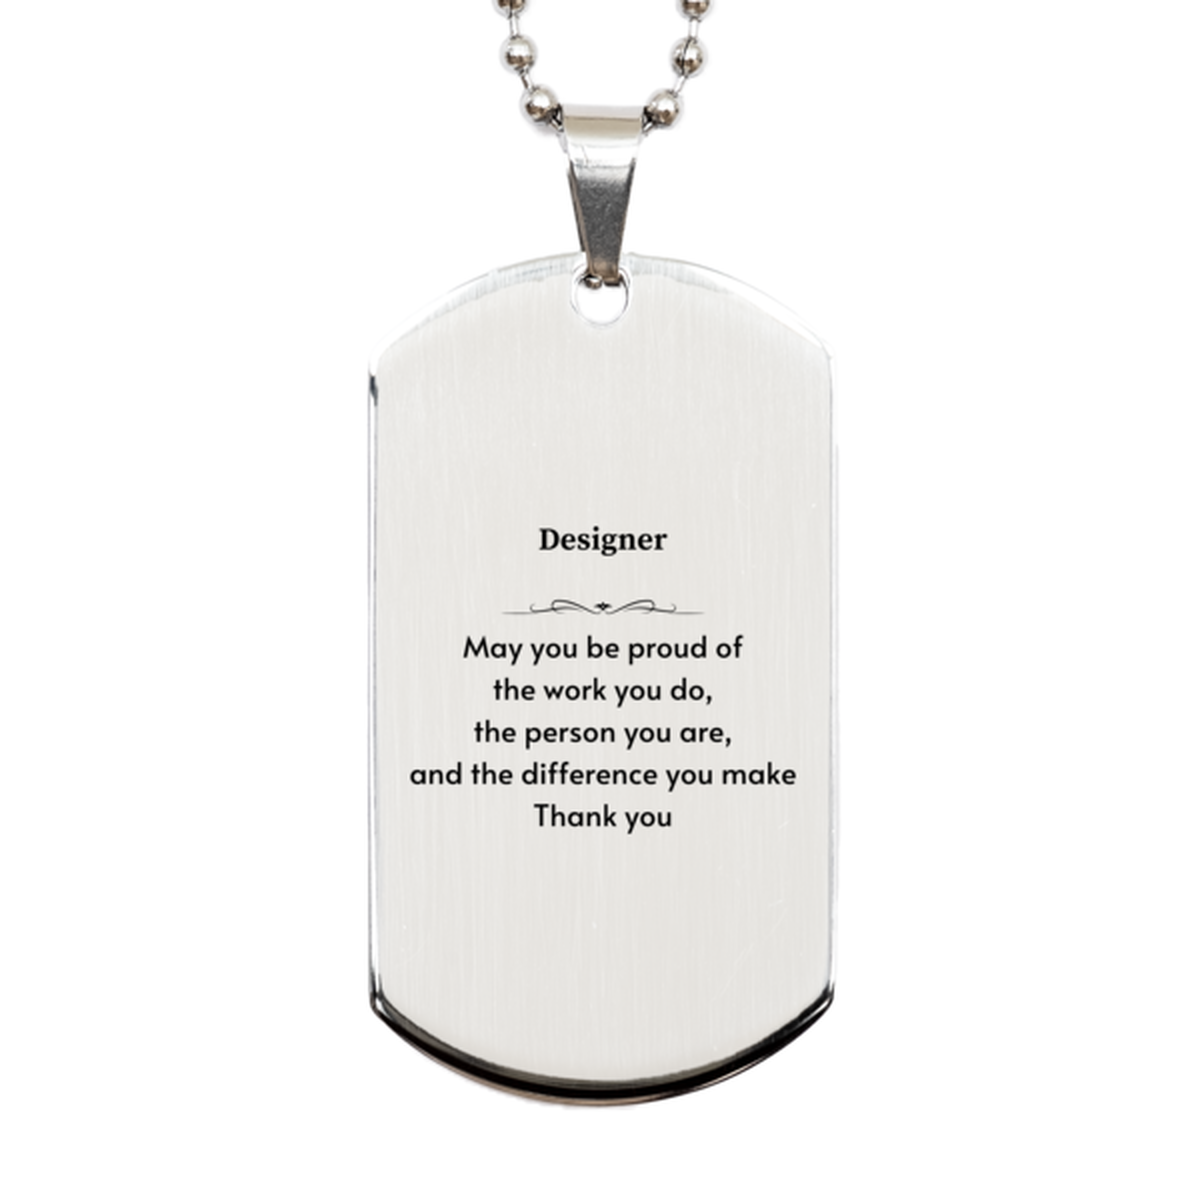 Heartwarming Silver Dog Tag Retirement Coworkers Gifts for Designer, Designer May You be proud of the work you do, the person you are Gifts for Boss Men Women Friends